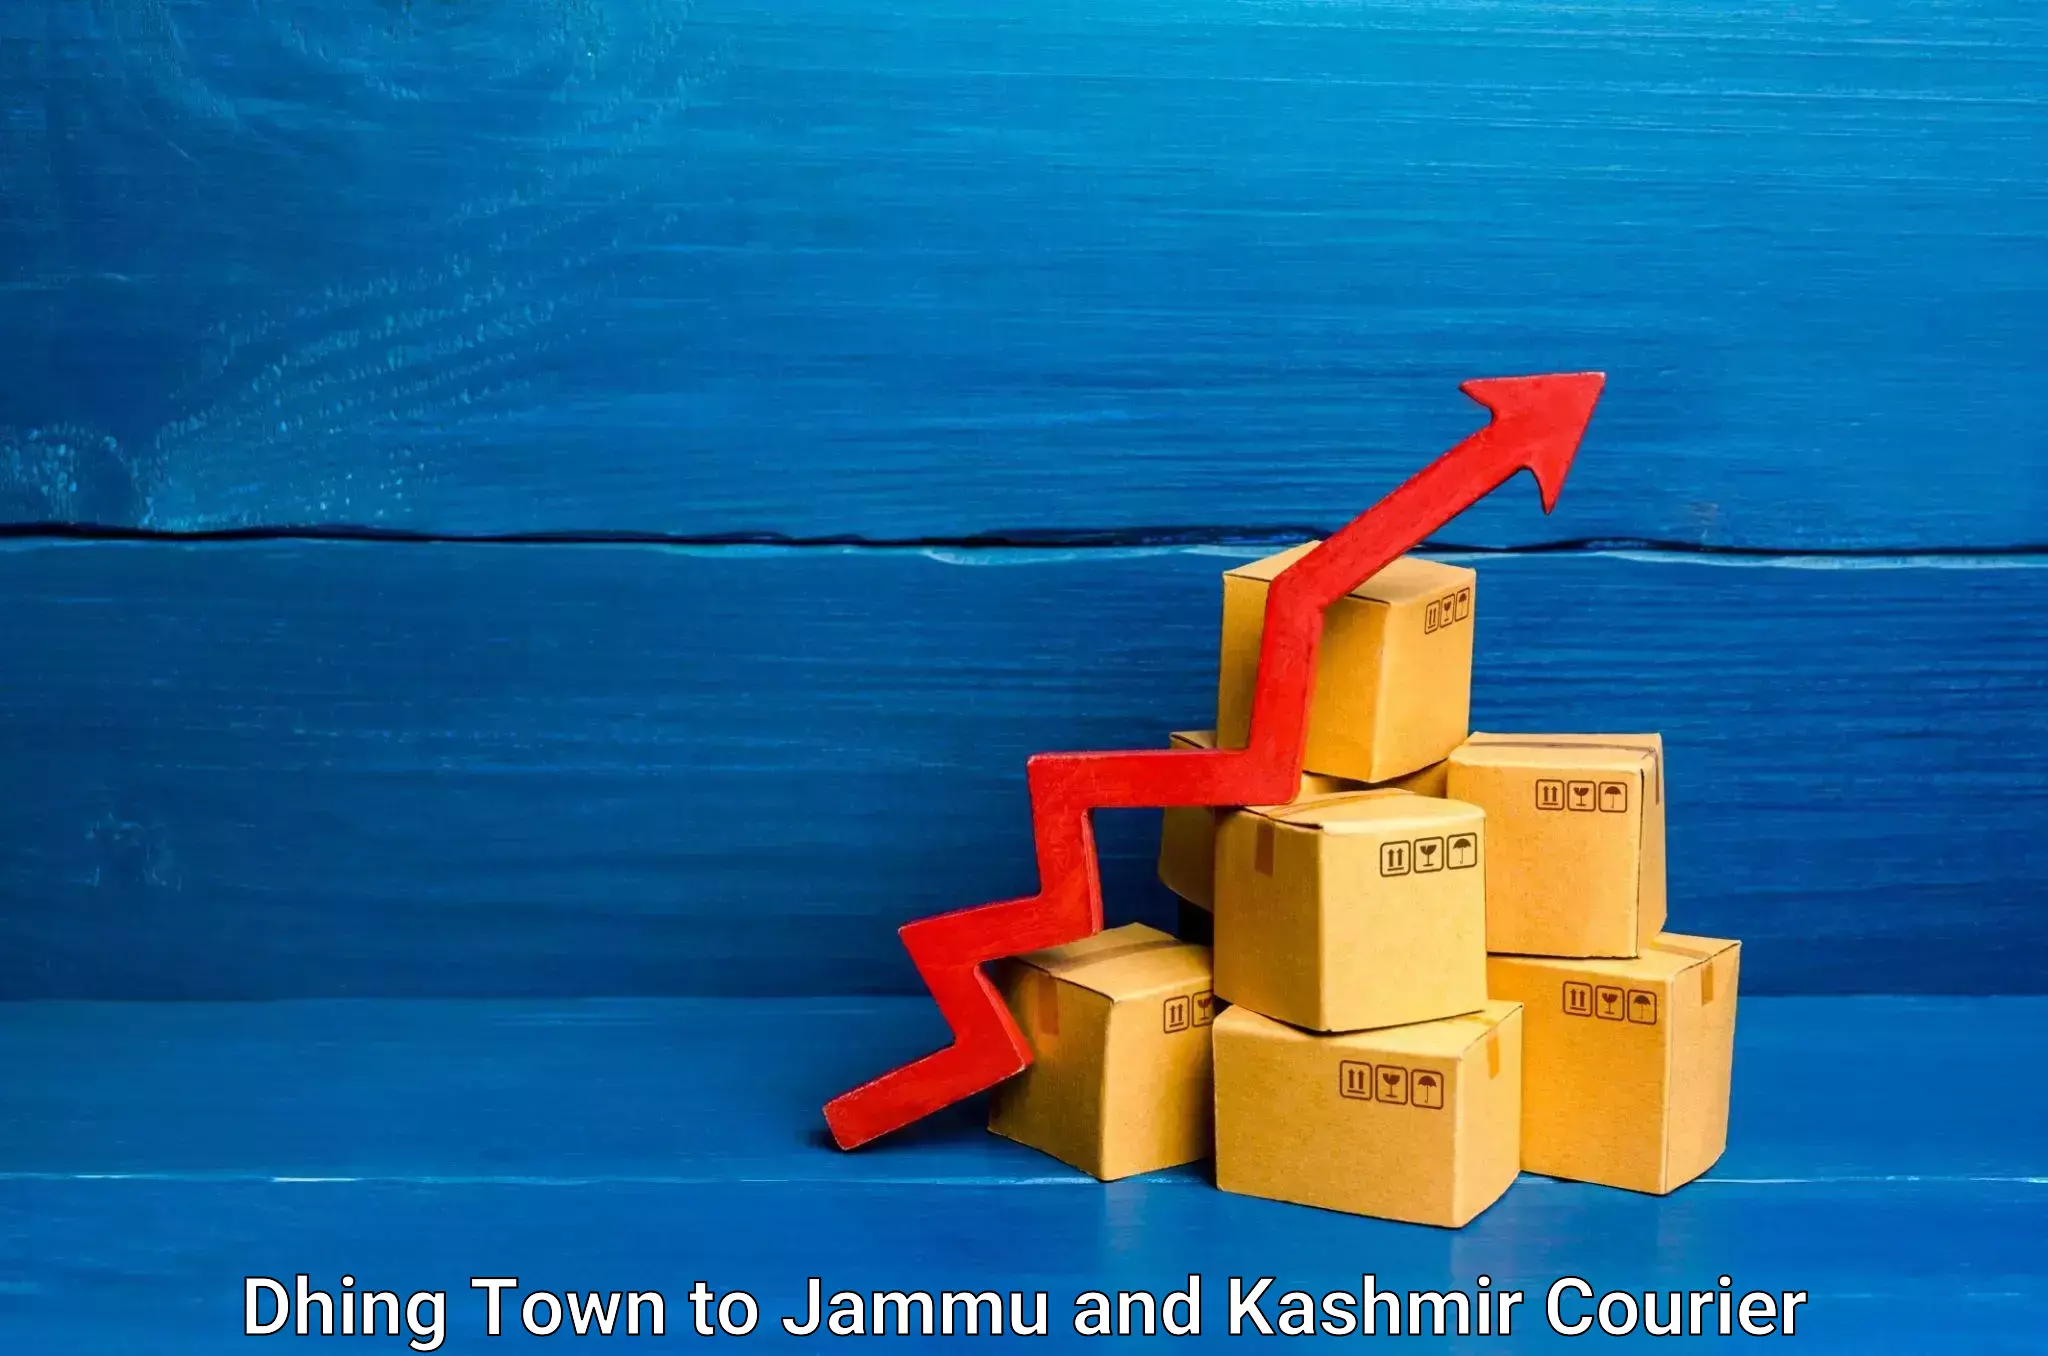 Efficient shipping operations Dhing Town to Jammu and Kashmir